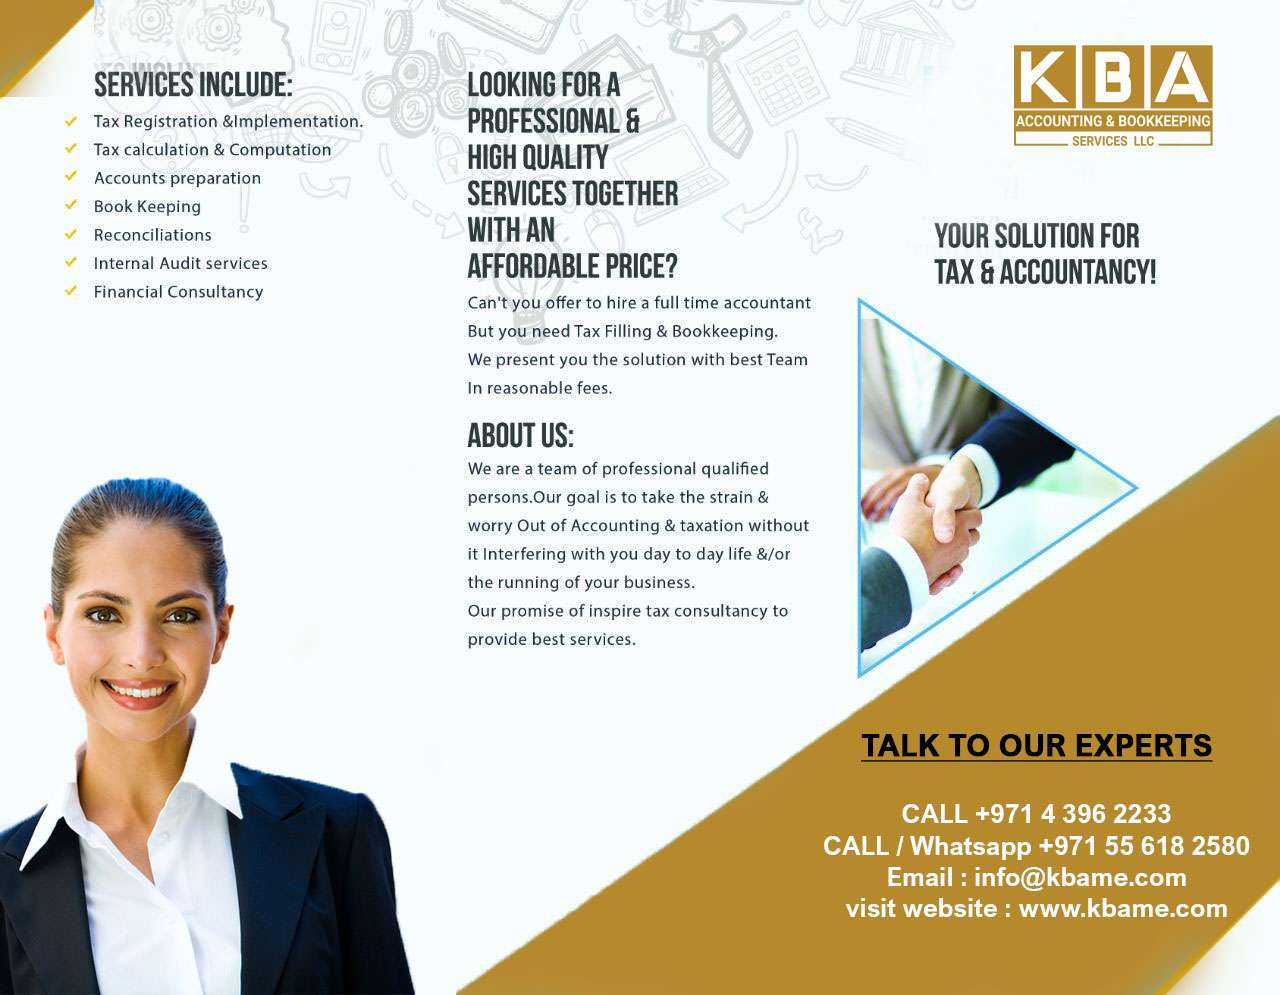 Kba Accounting And Bookkeeping